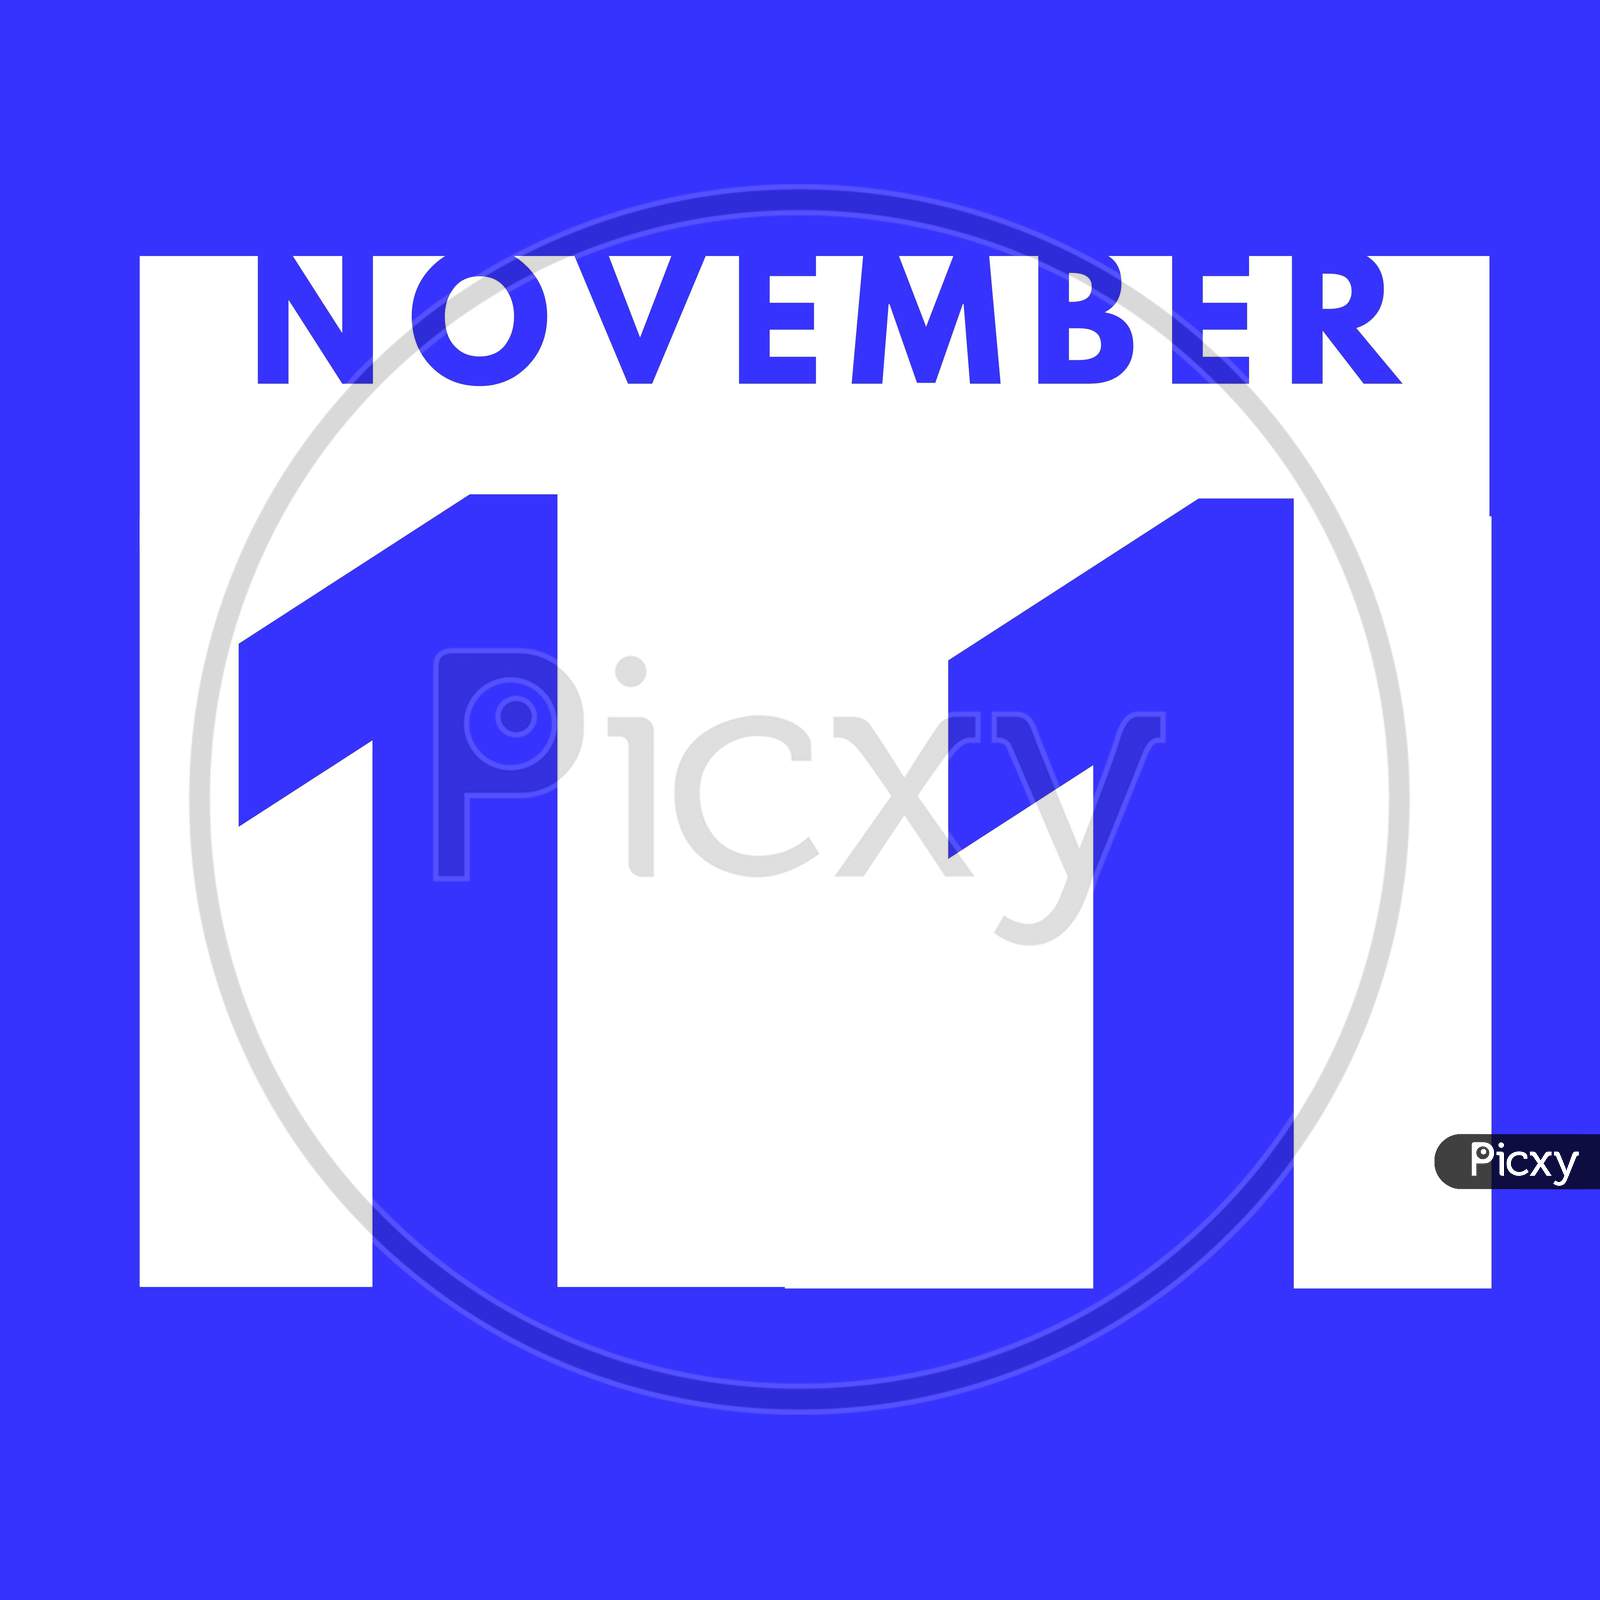 November 11 . Flat Modern Daily Calendar Icon .Date ,Day, Month .Calendar For The Month Of November